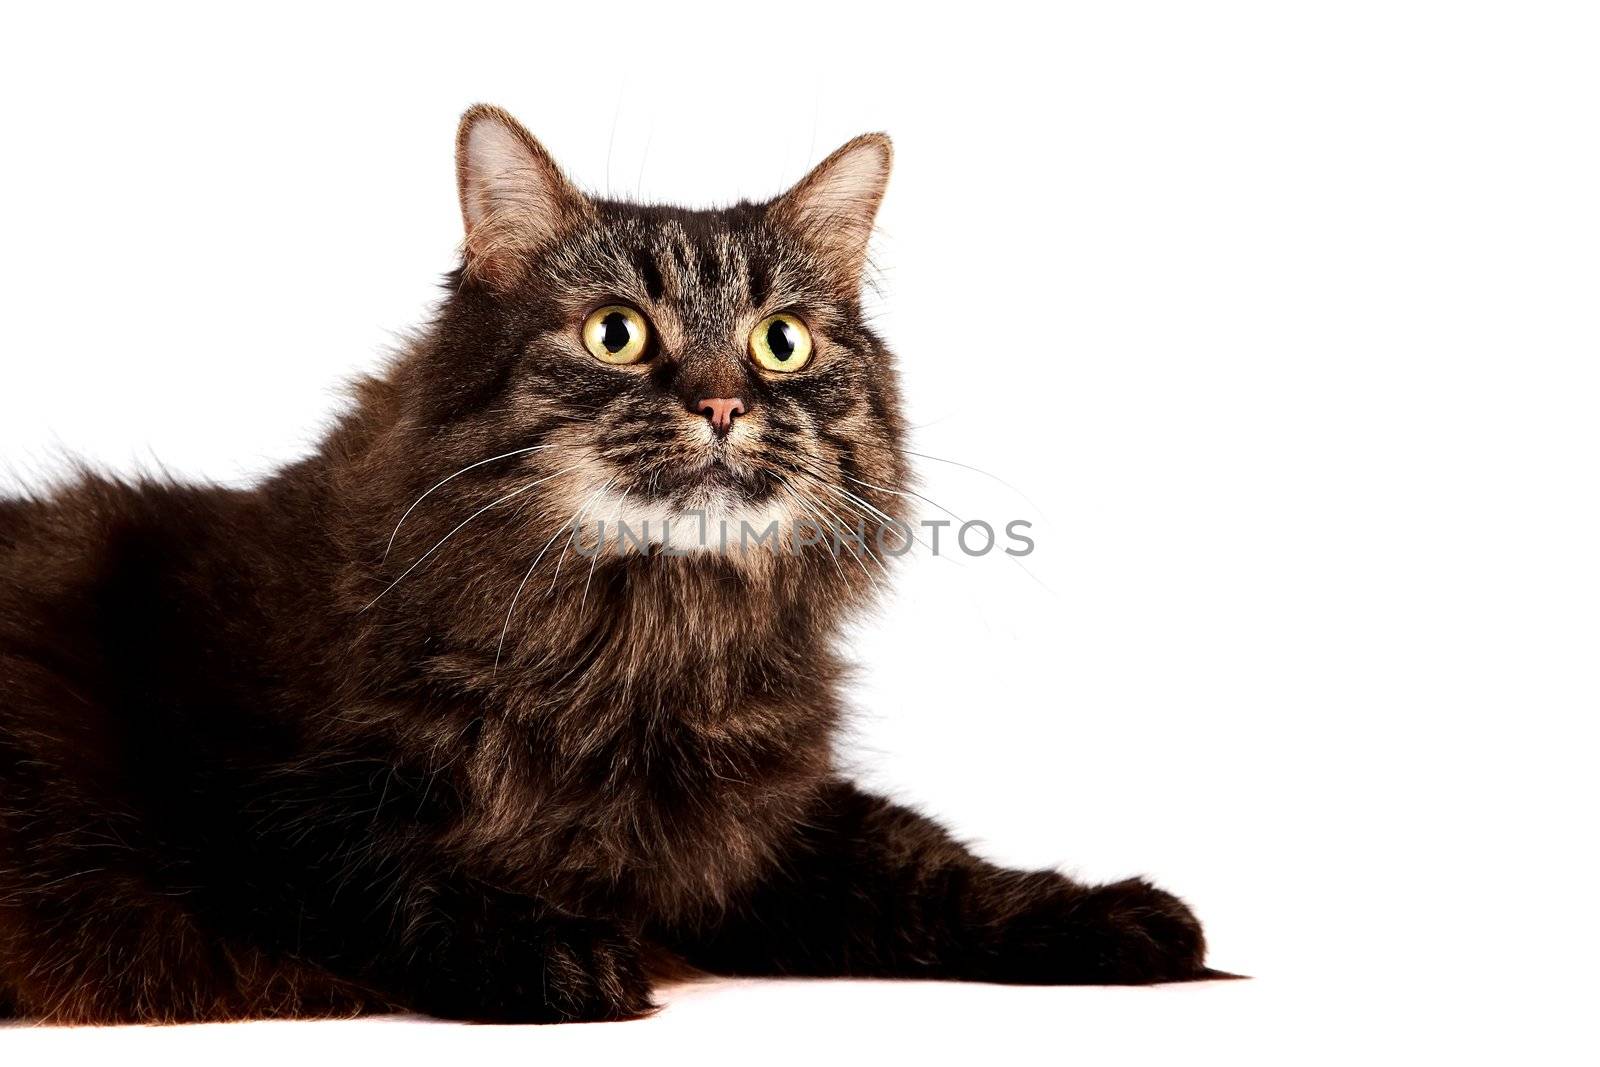 Fluffy cat on a white background